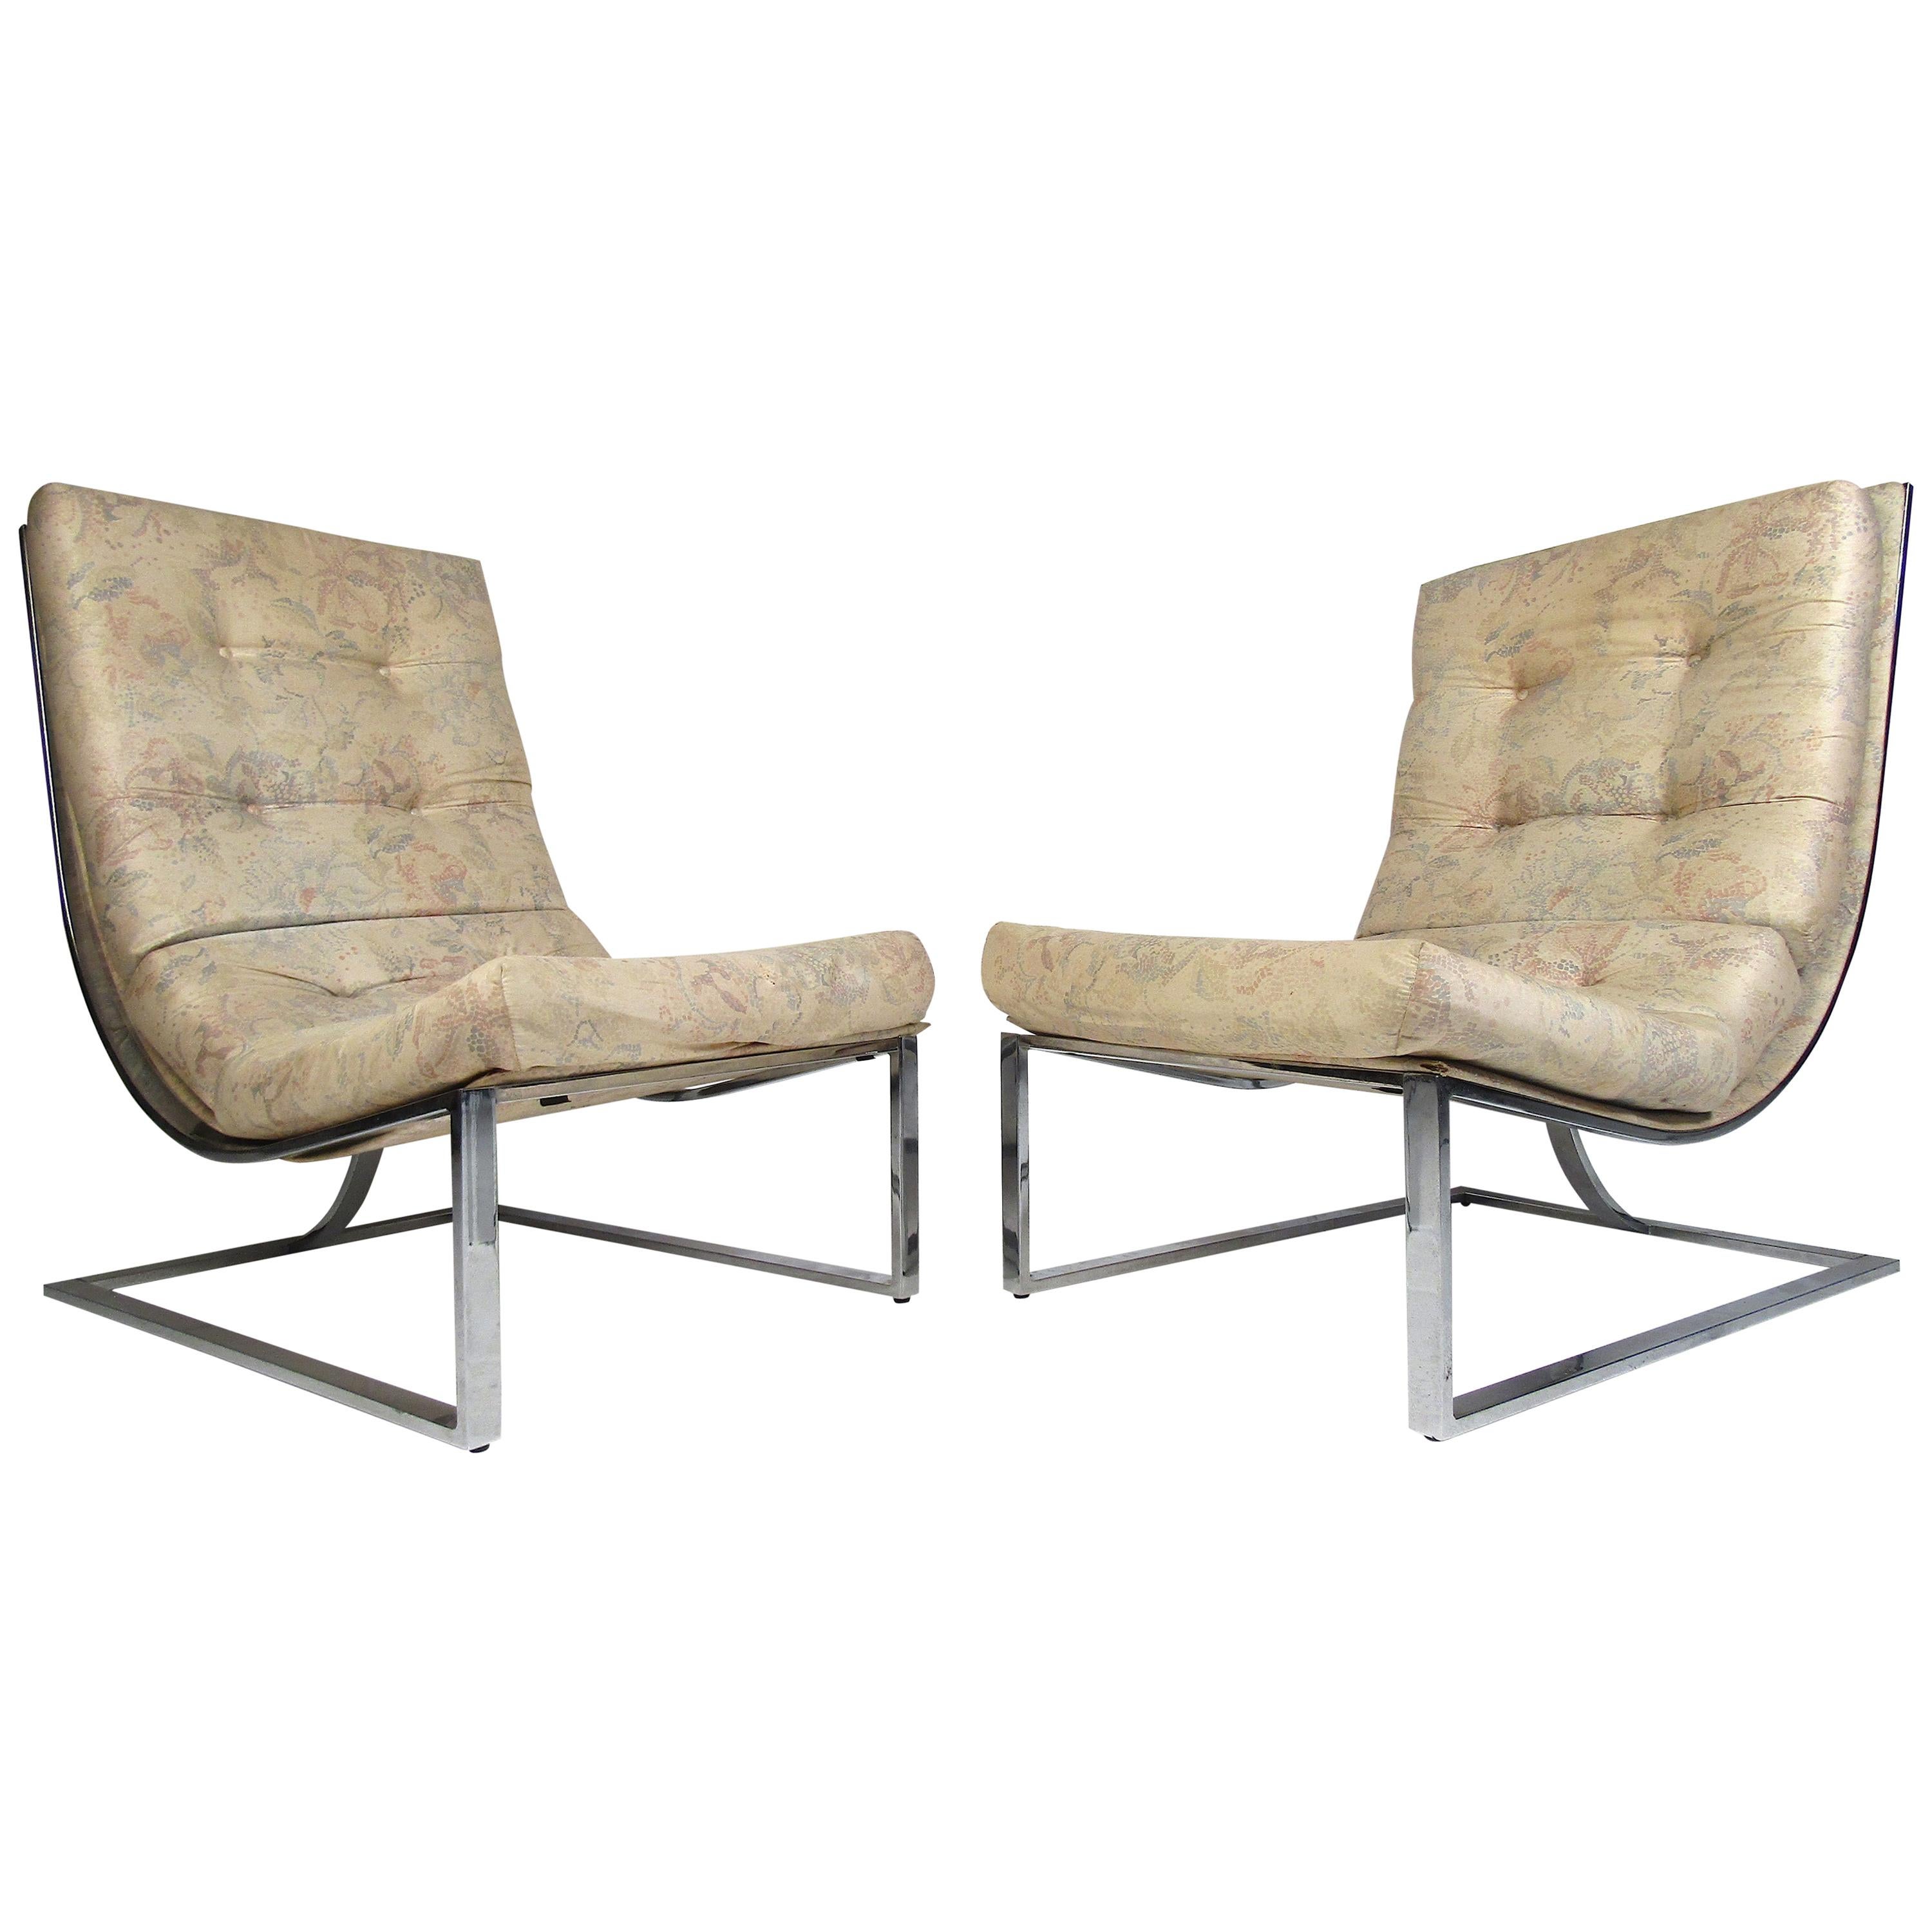 Midcentury Cantilevered Scoop Chairs, a Pair